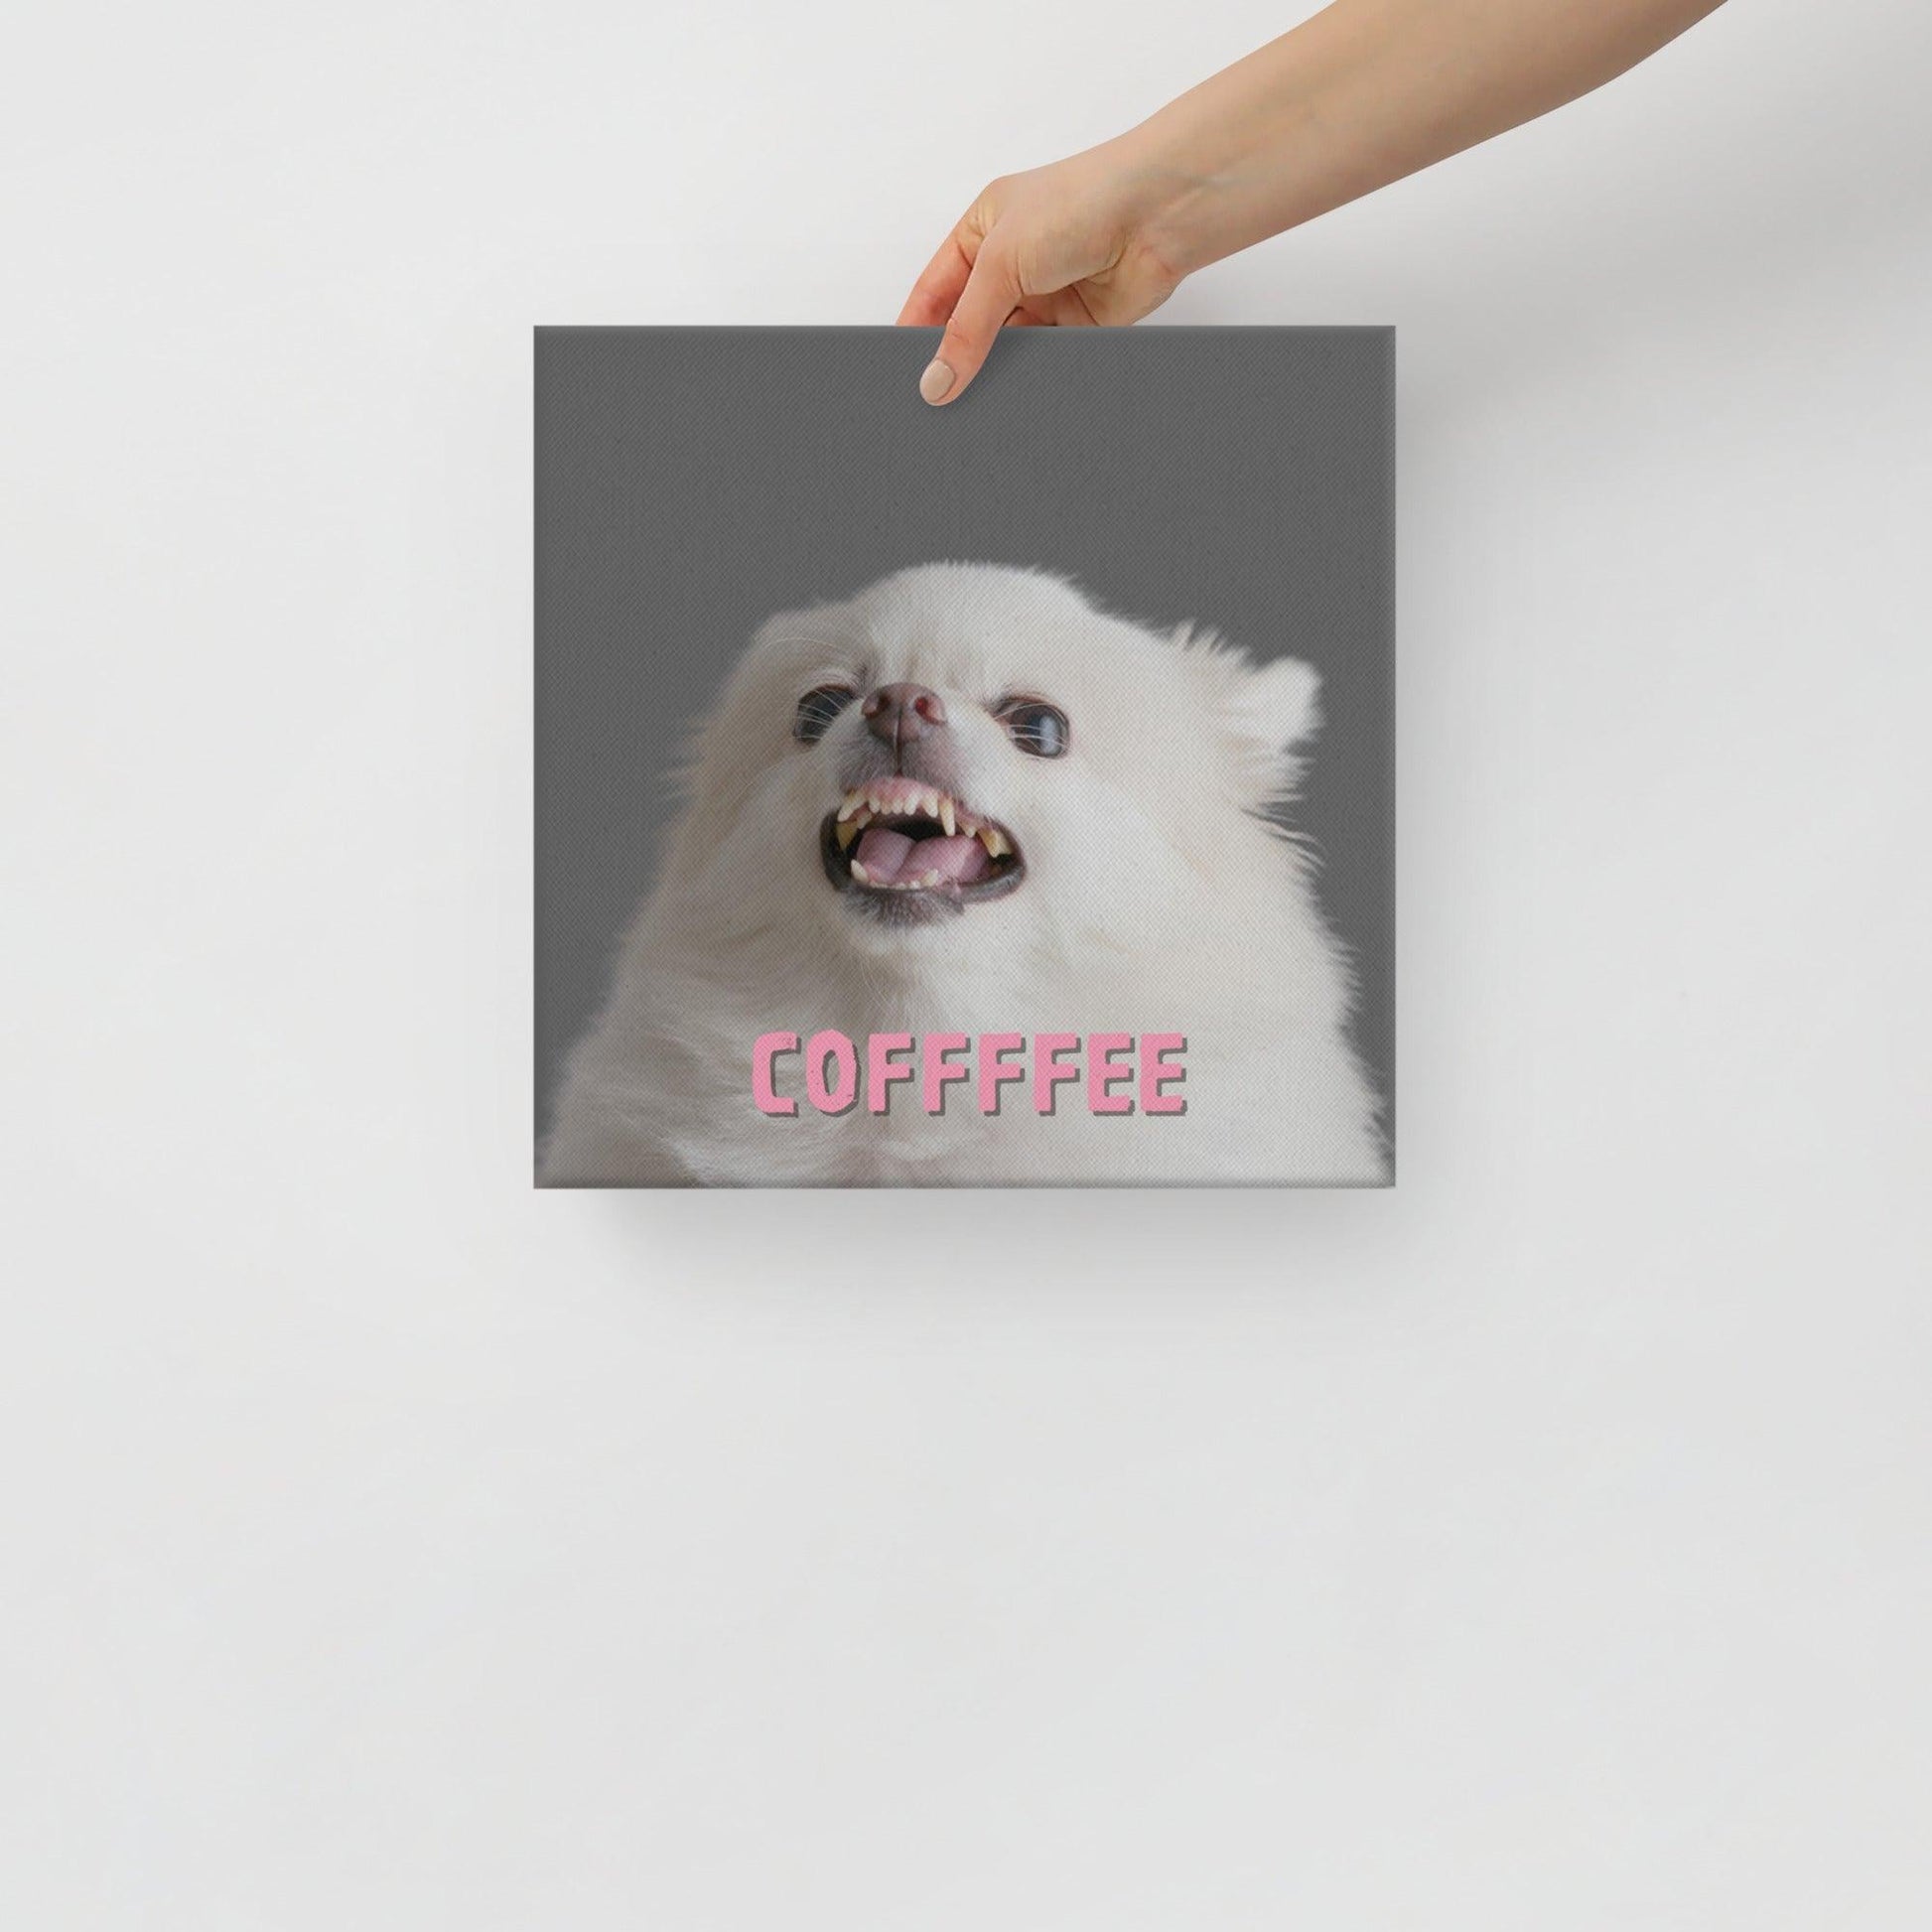 COFFFFEE - one of the famous Chimigos chihuahua memes. This is a vivid and fade resistant art print on a stretched canvas. A cute and fluffy white chihuahua is feeling tetchy first thing in the morning and barking - snapping - their order for coffee. Better shut up and put the kettle on already! A funny and stylish gift idea for someone who loves chihuahuas and coffee. Or a warning to your family or guests that you're not a morning person, and to keep it cool in the morning kitchen.